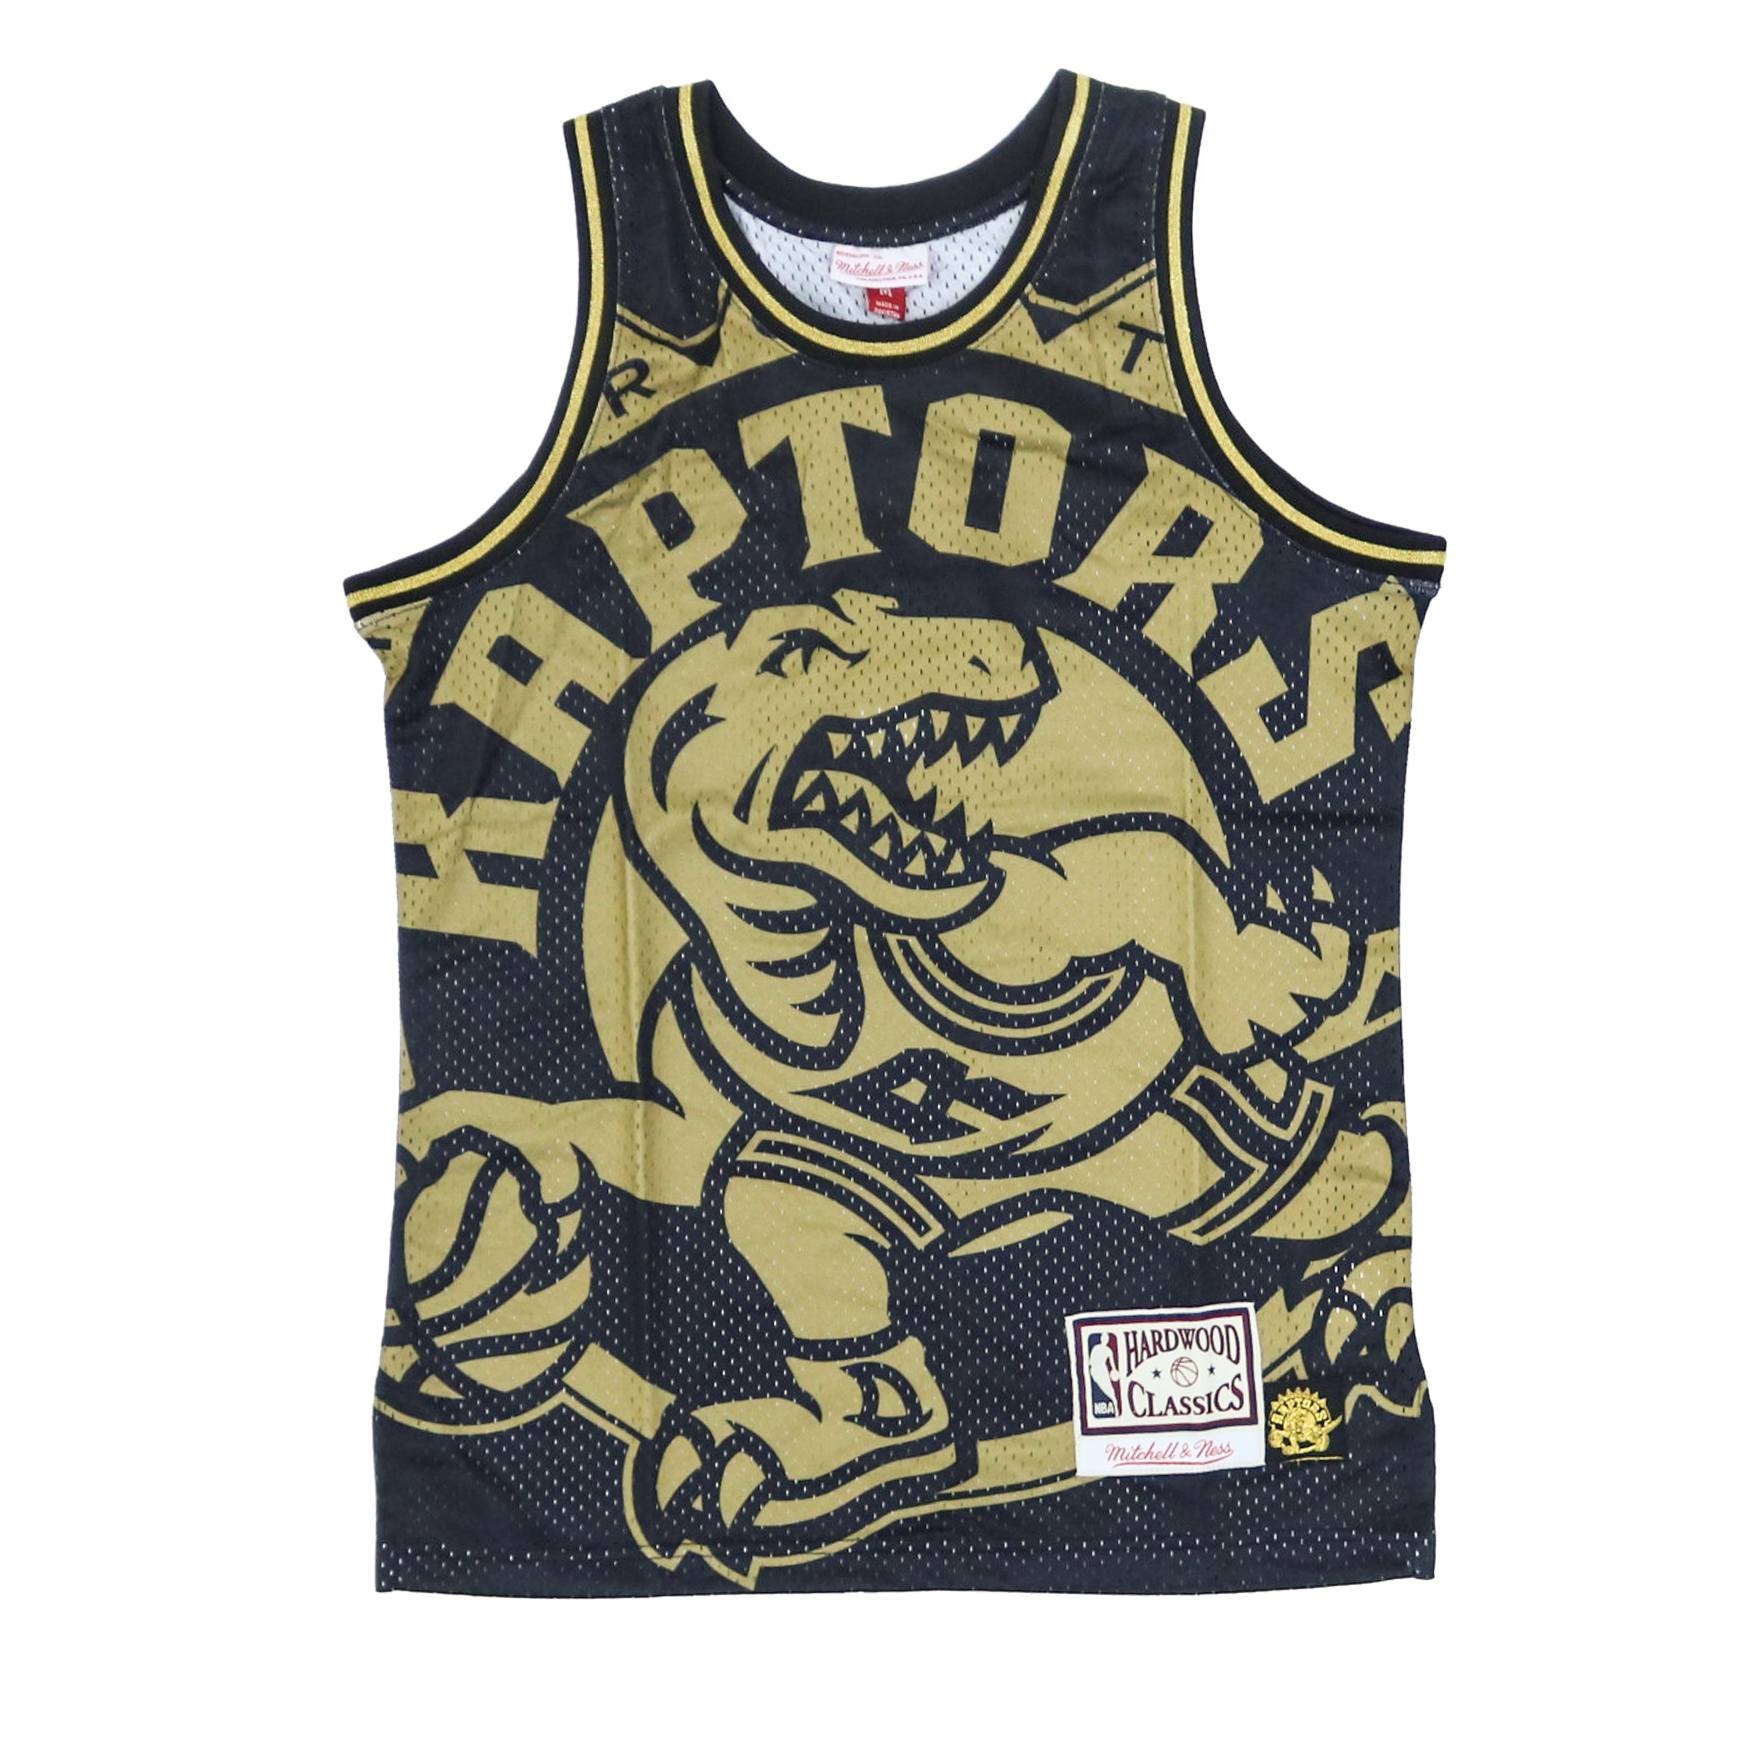 white and gold toronto raptors jersey